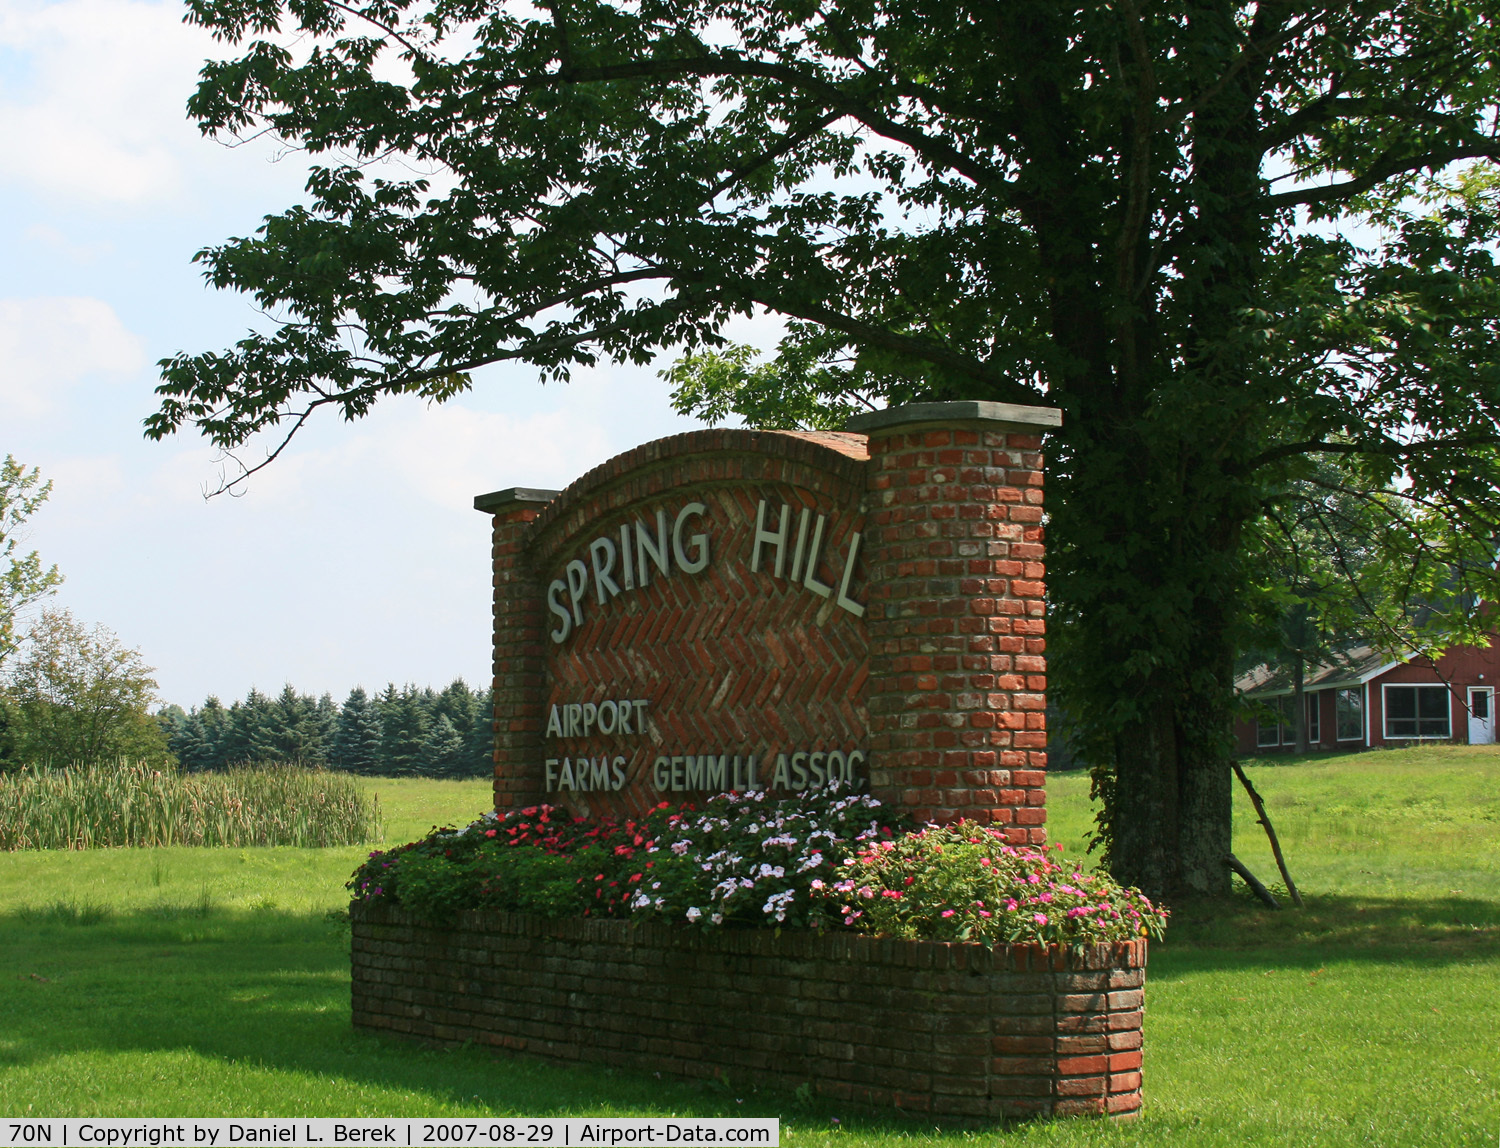 Spring Hill Airport (70N) - Welcome to Spring Hill.